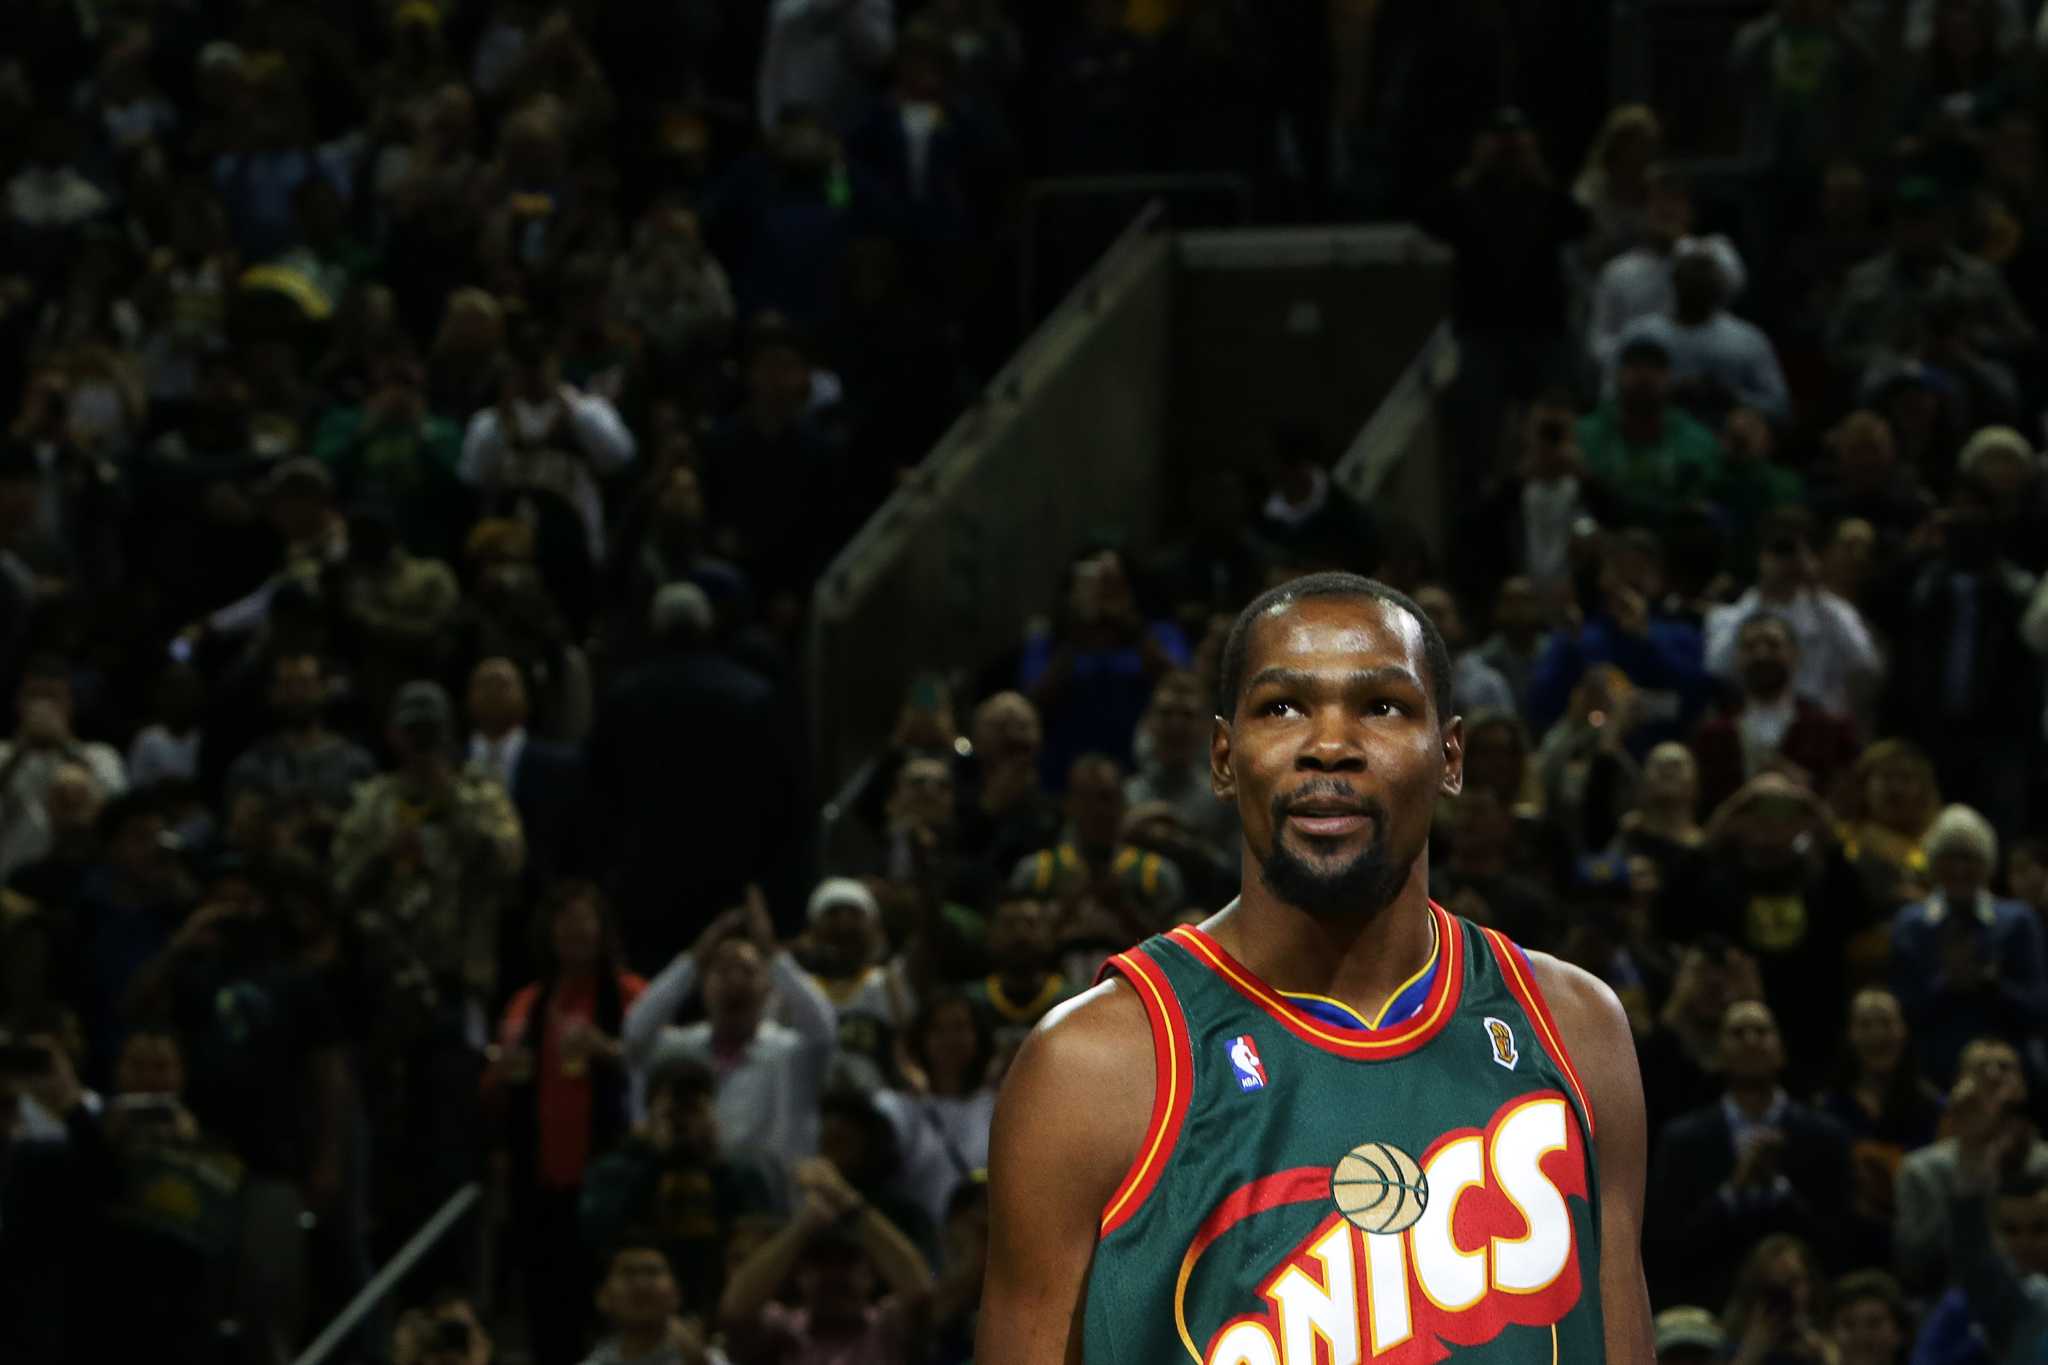 kevin durant sonics jersey